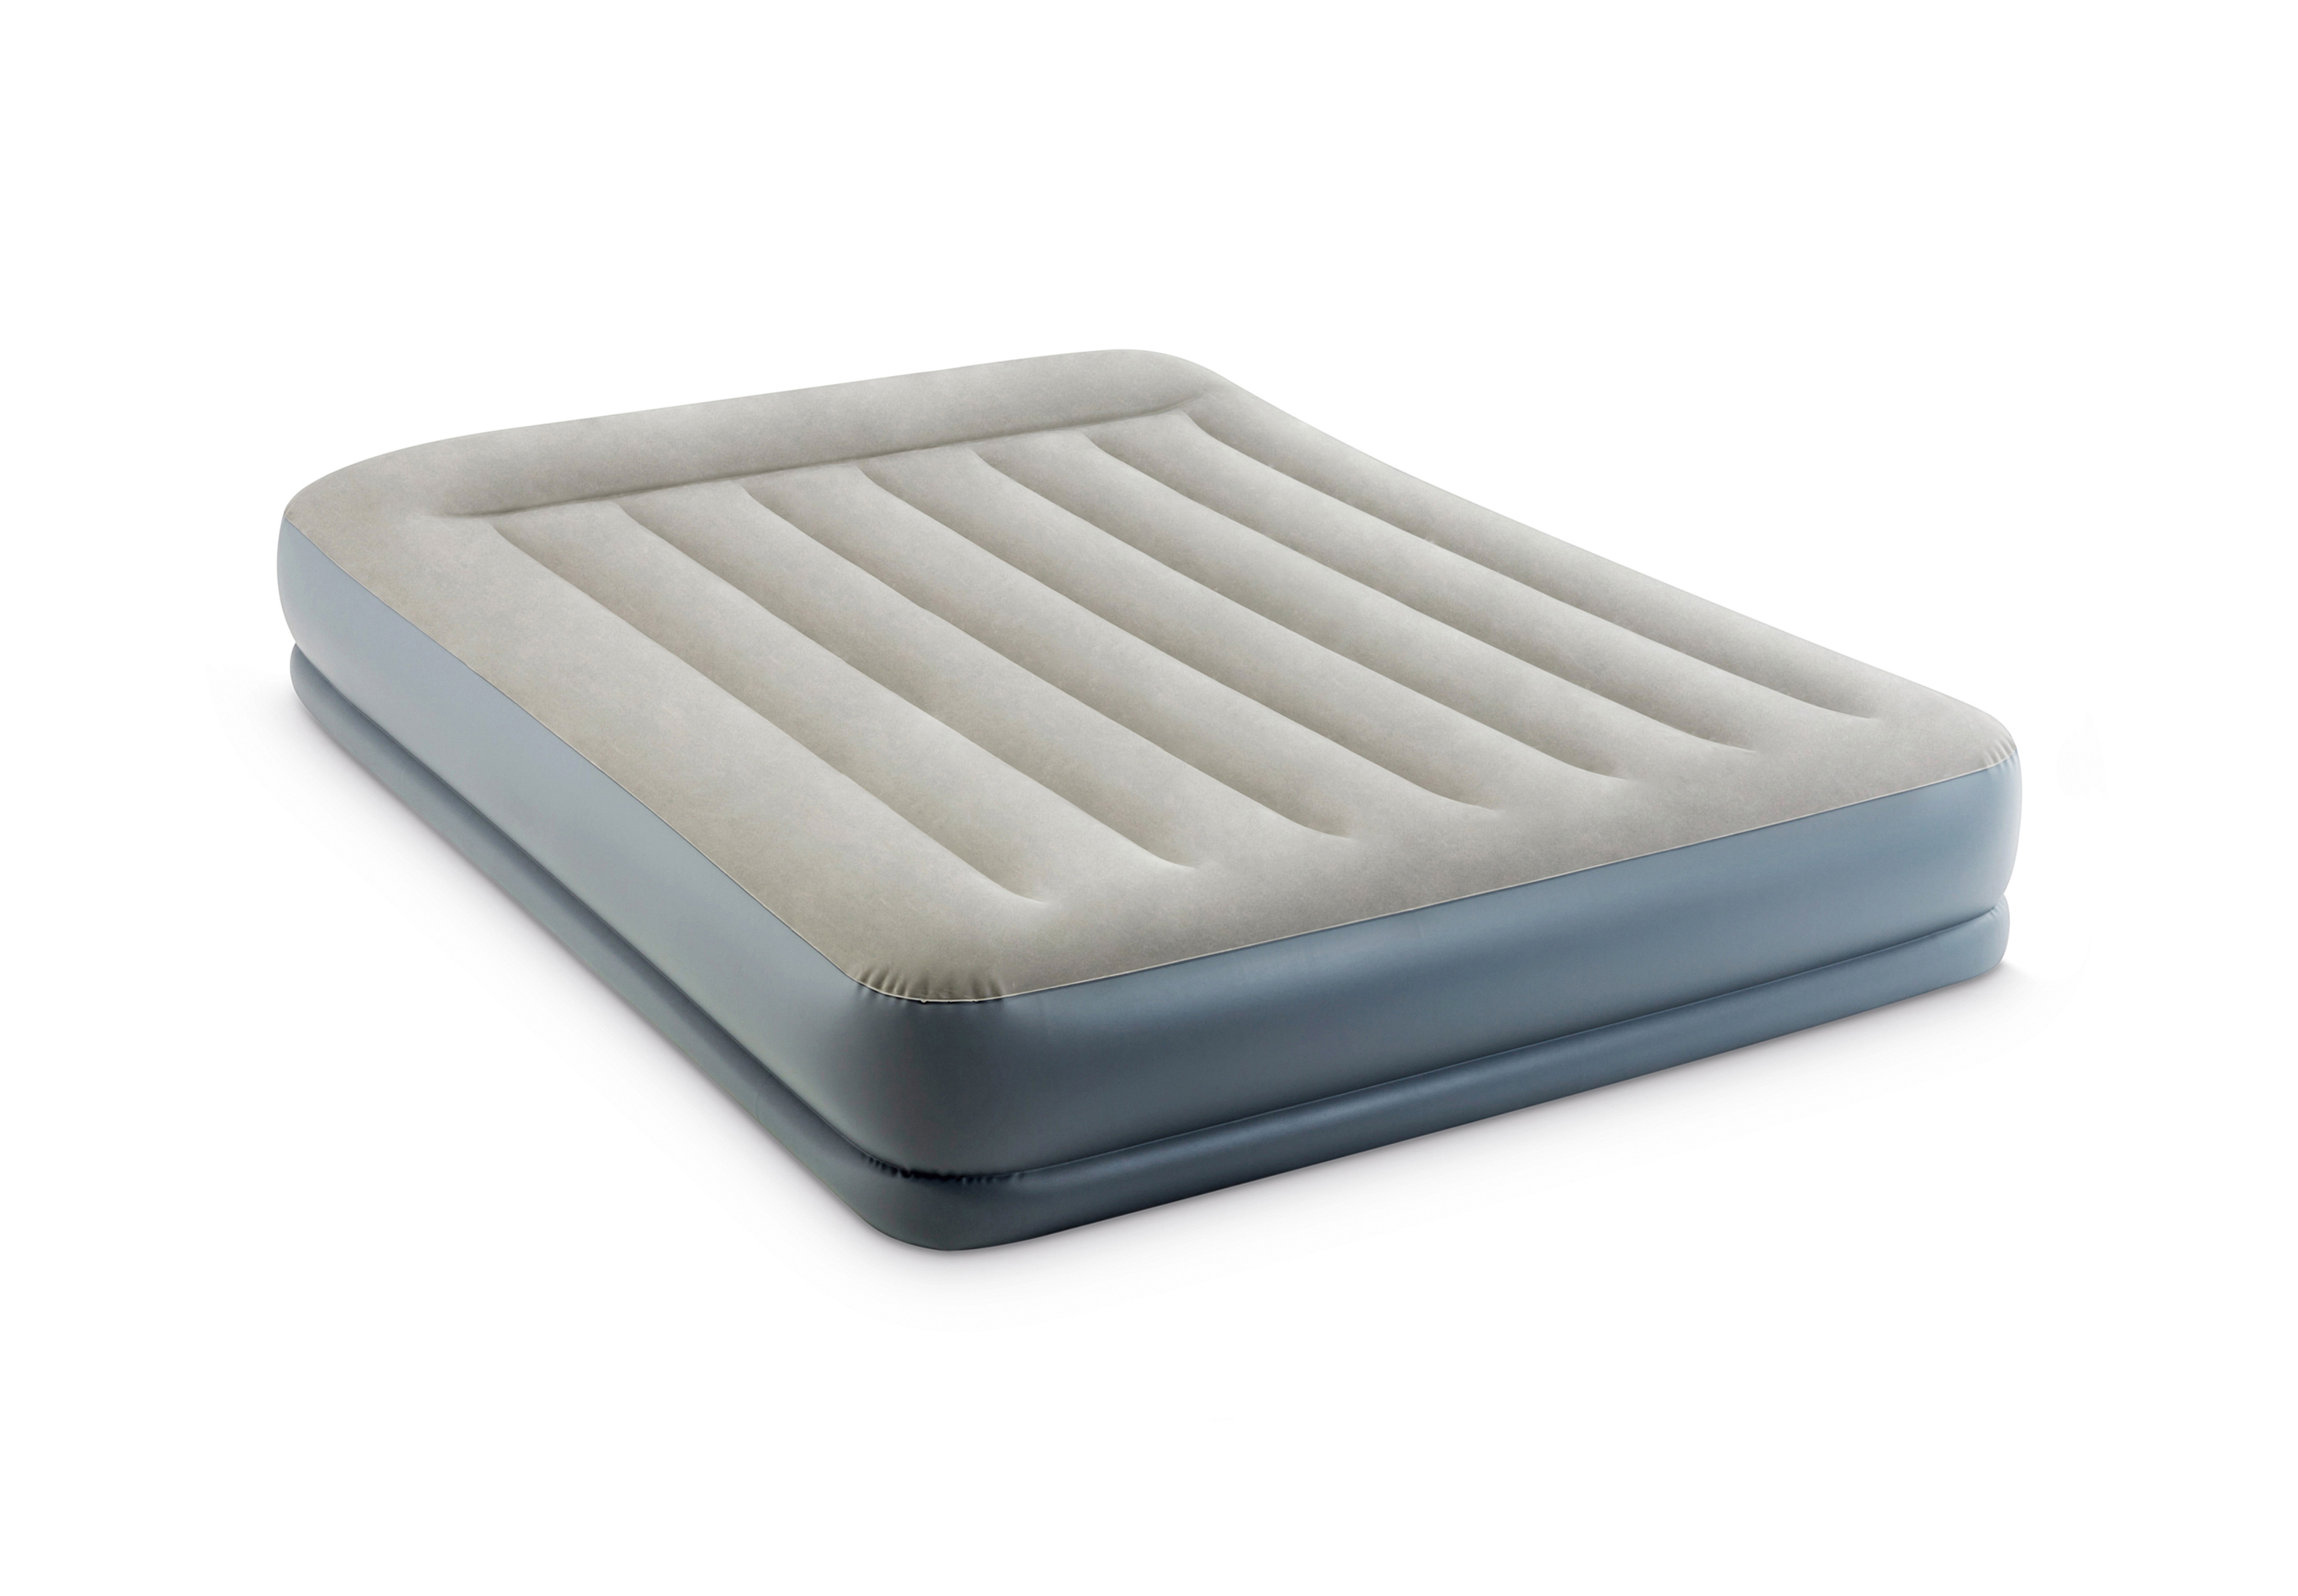 Intex Dura-Beam 12 inch Pillow Rest Mid-Rise Air Bed Mattress with Built-in Pump, Queen - image 4 of 13